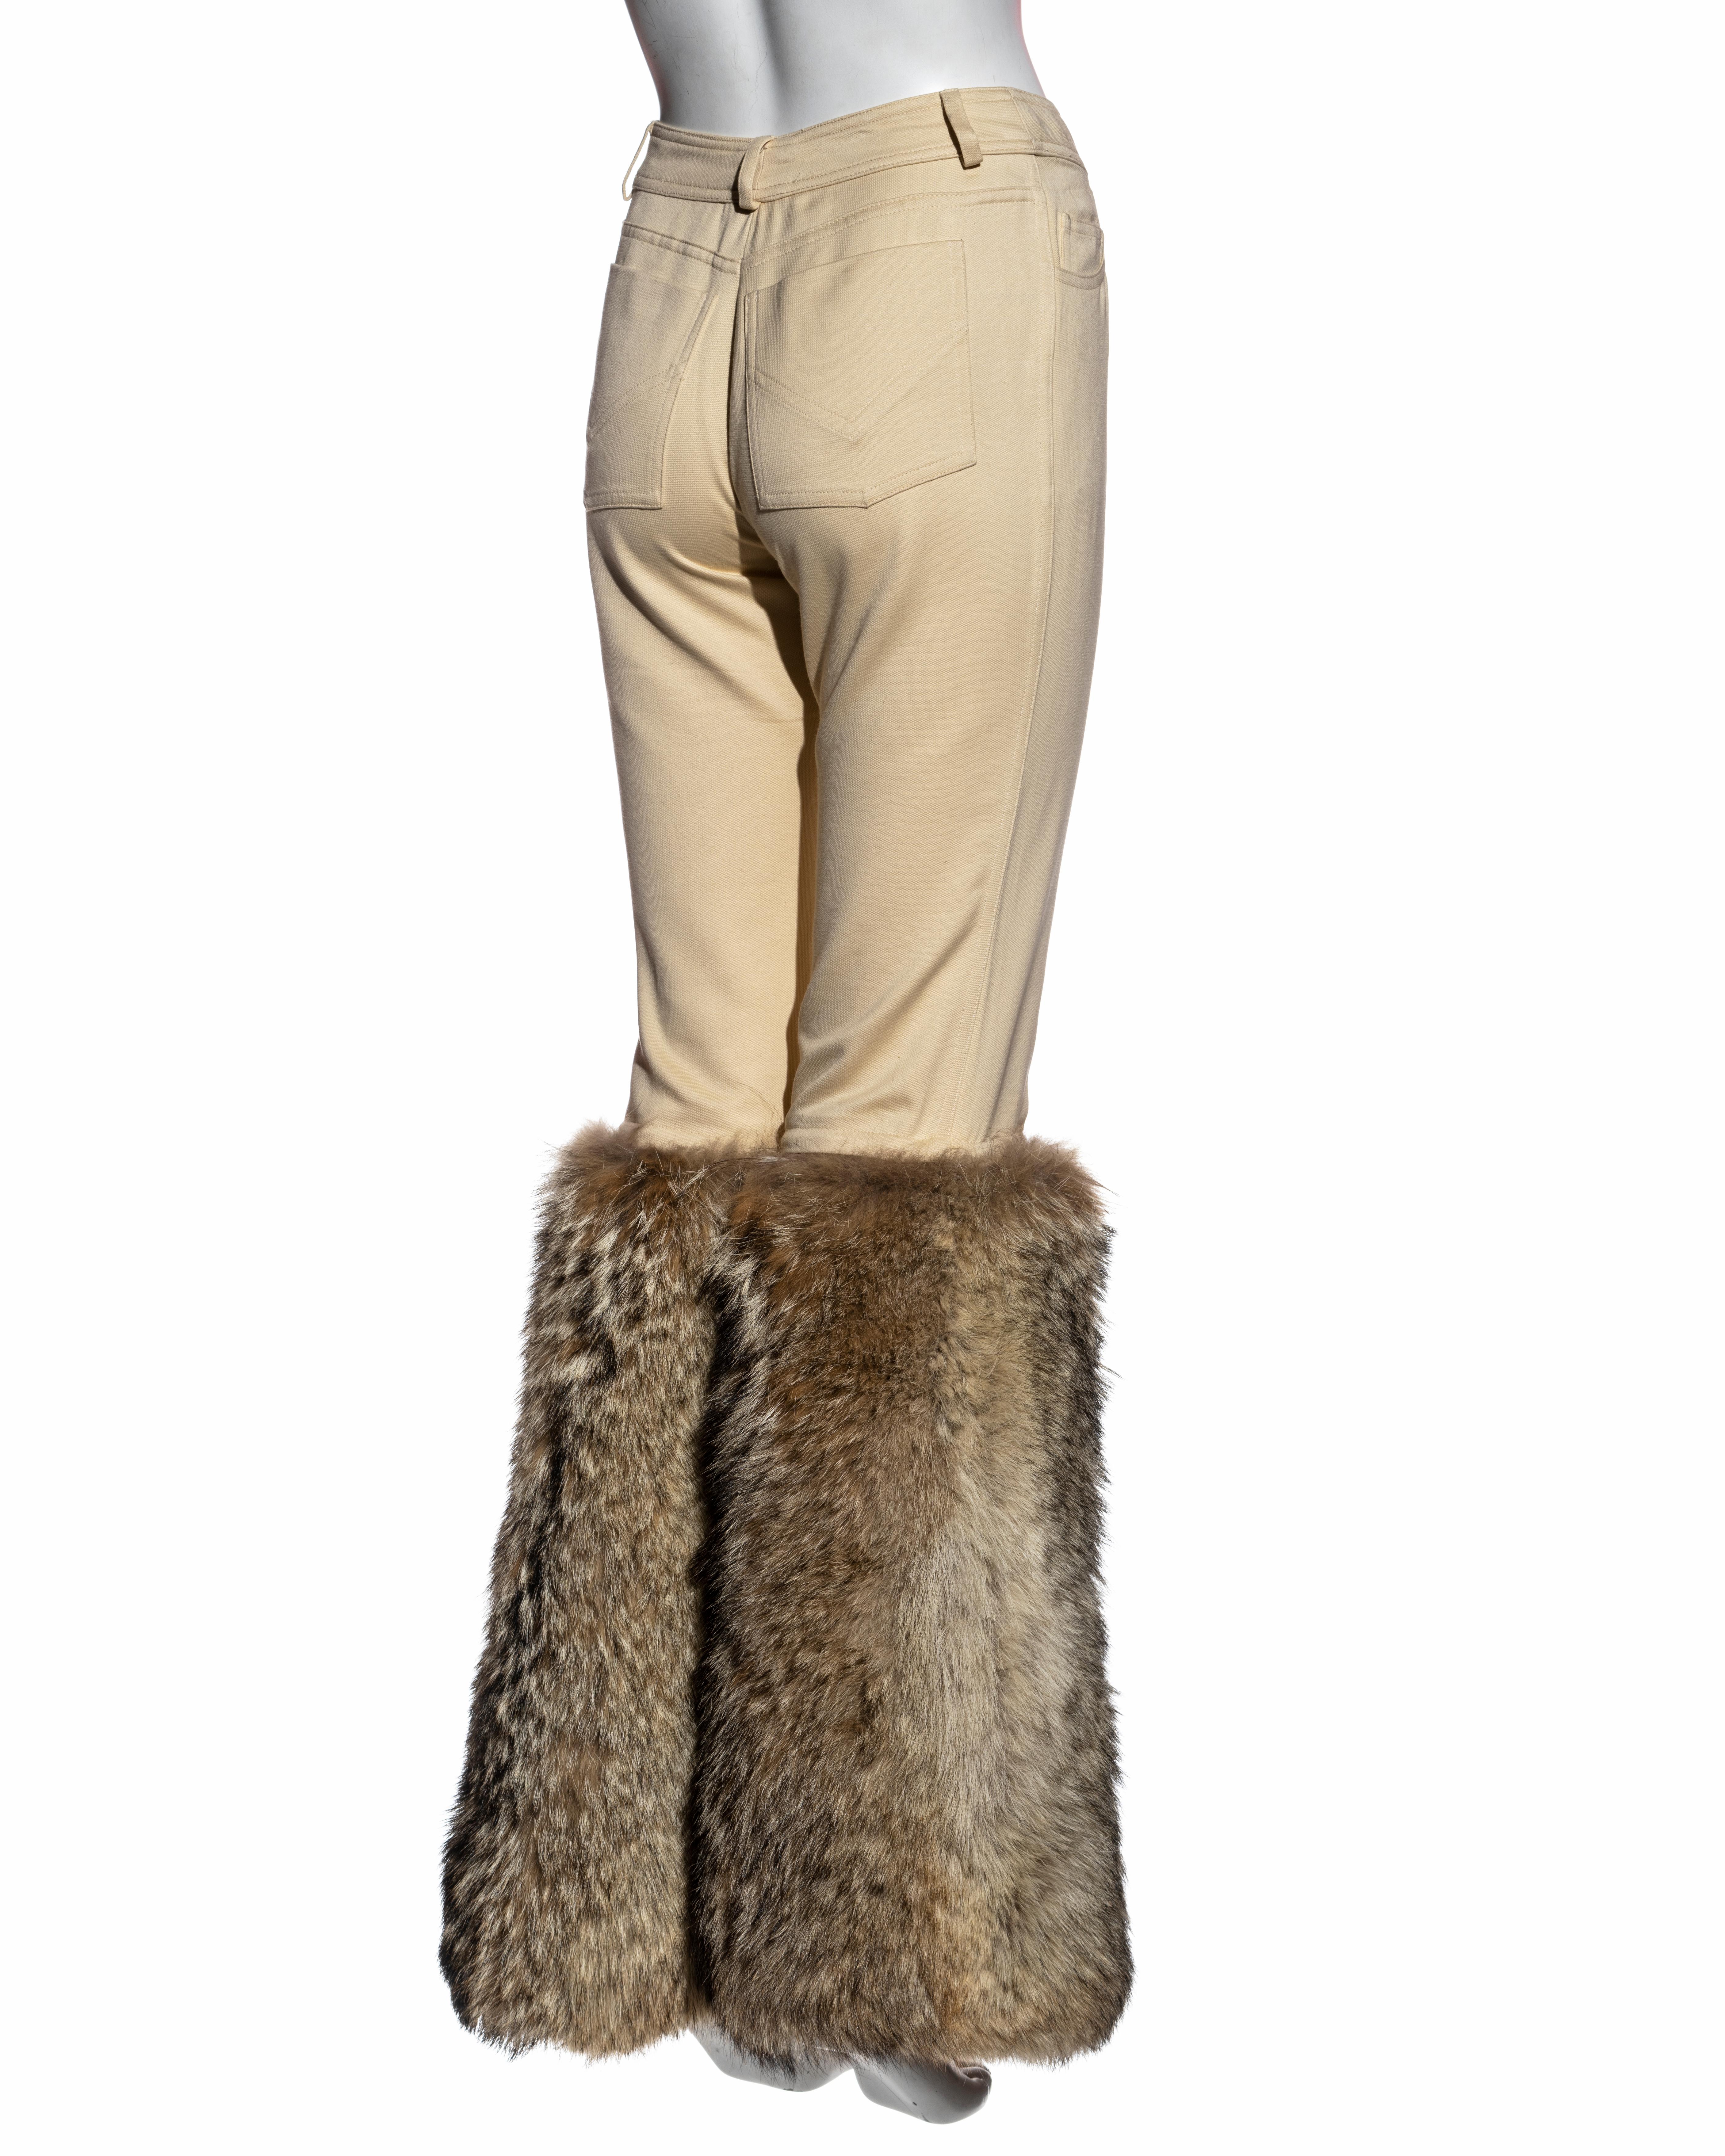 Brown Christian Dior by John Galliano cream cotton pants with coyote fur, fw 2002